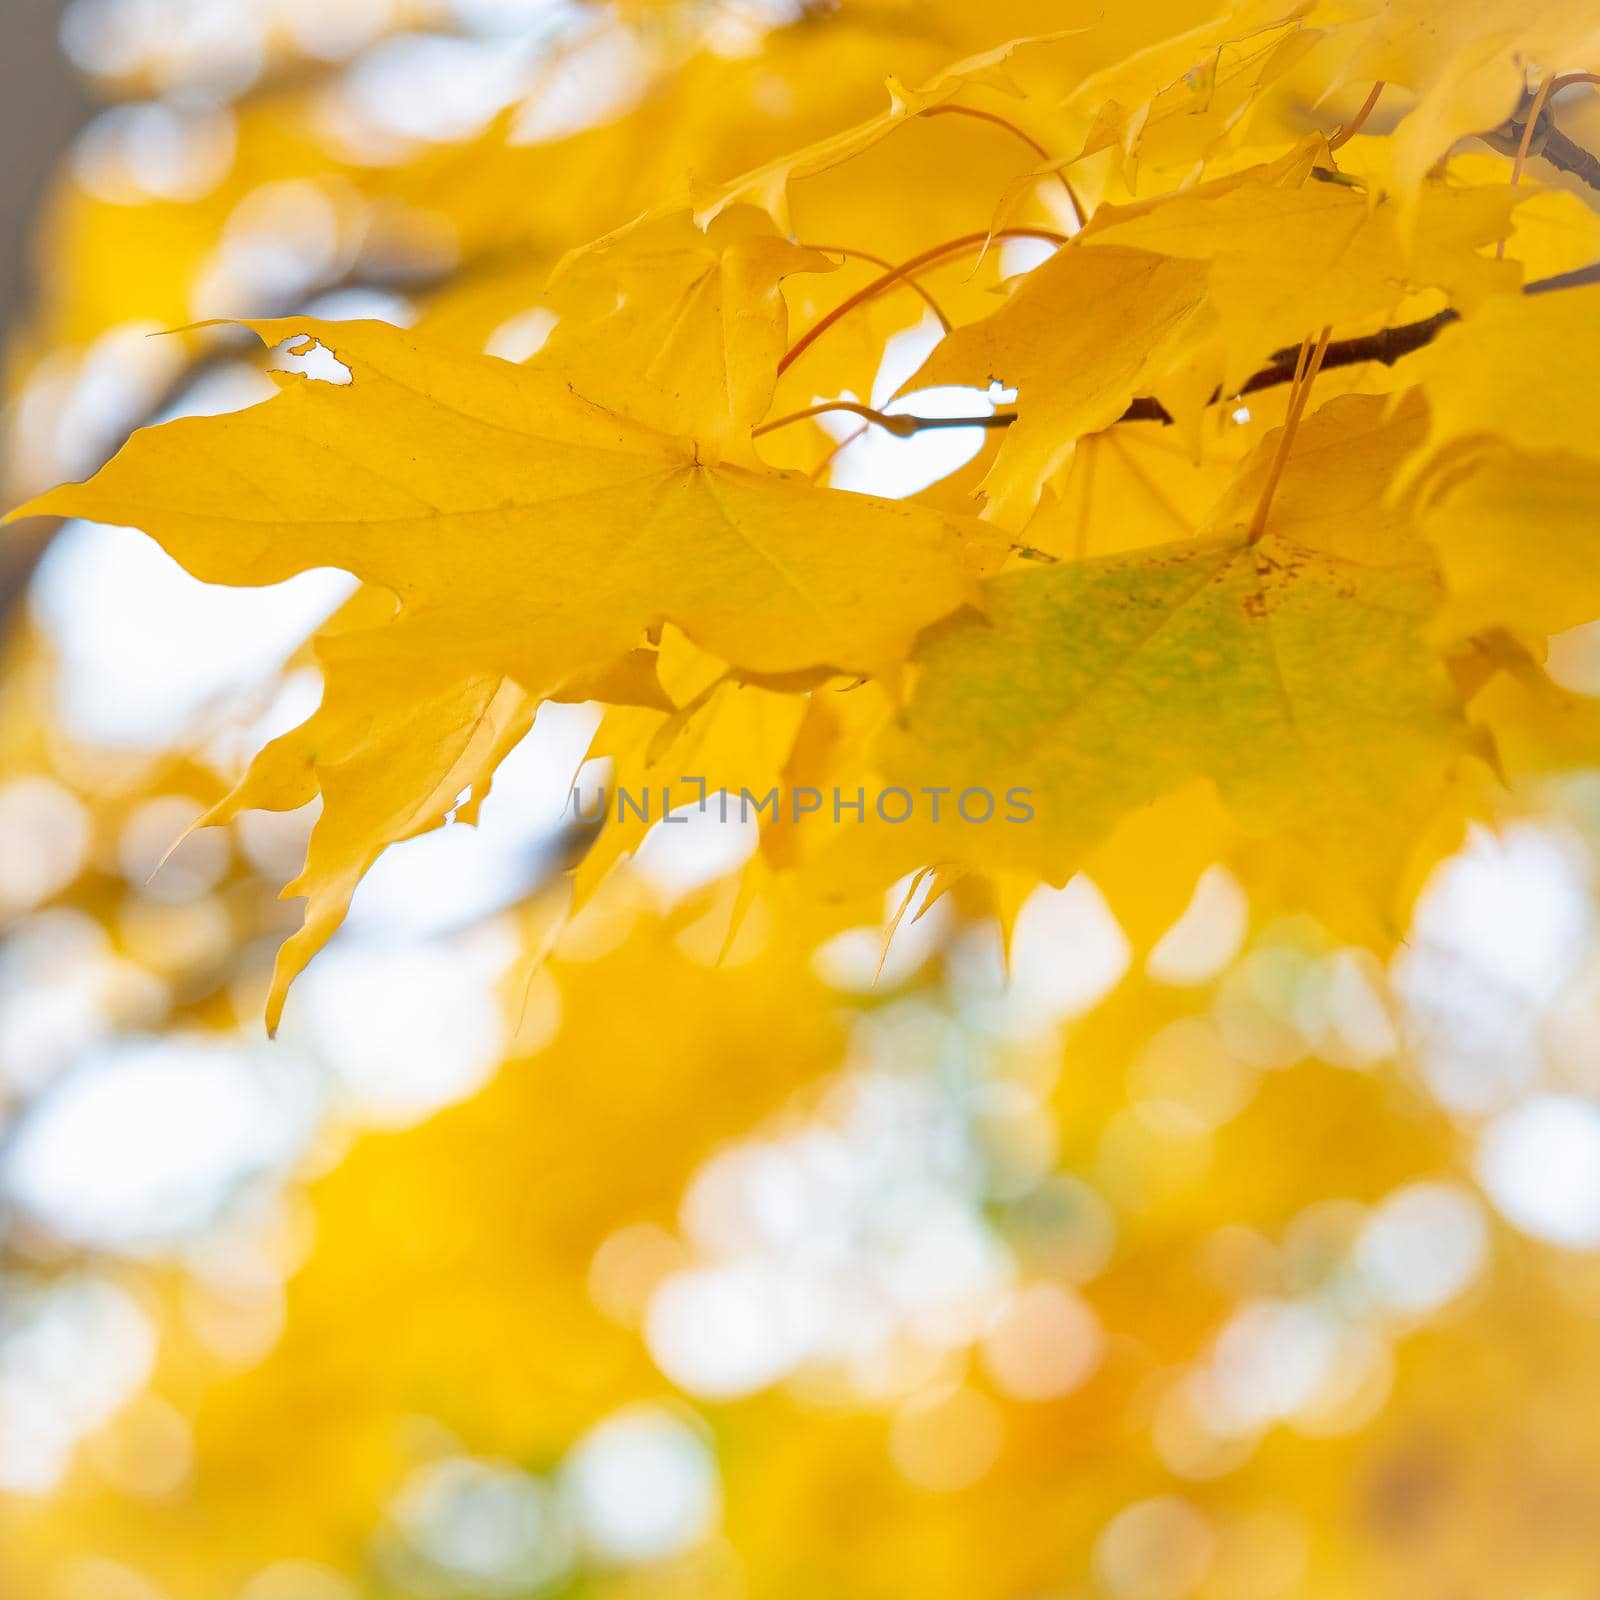 autumn abstract background of bright yellow and green leaves.